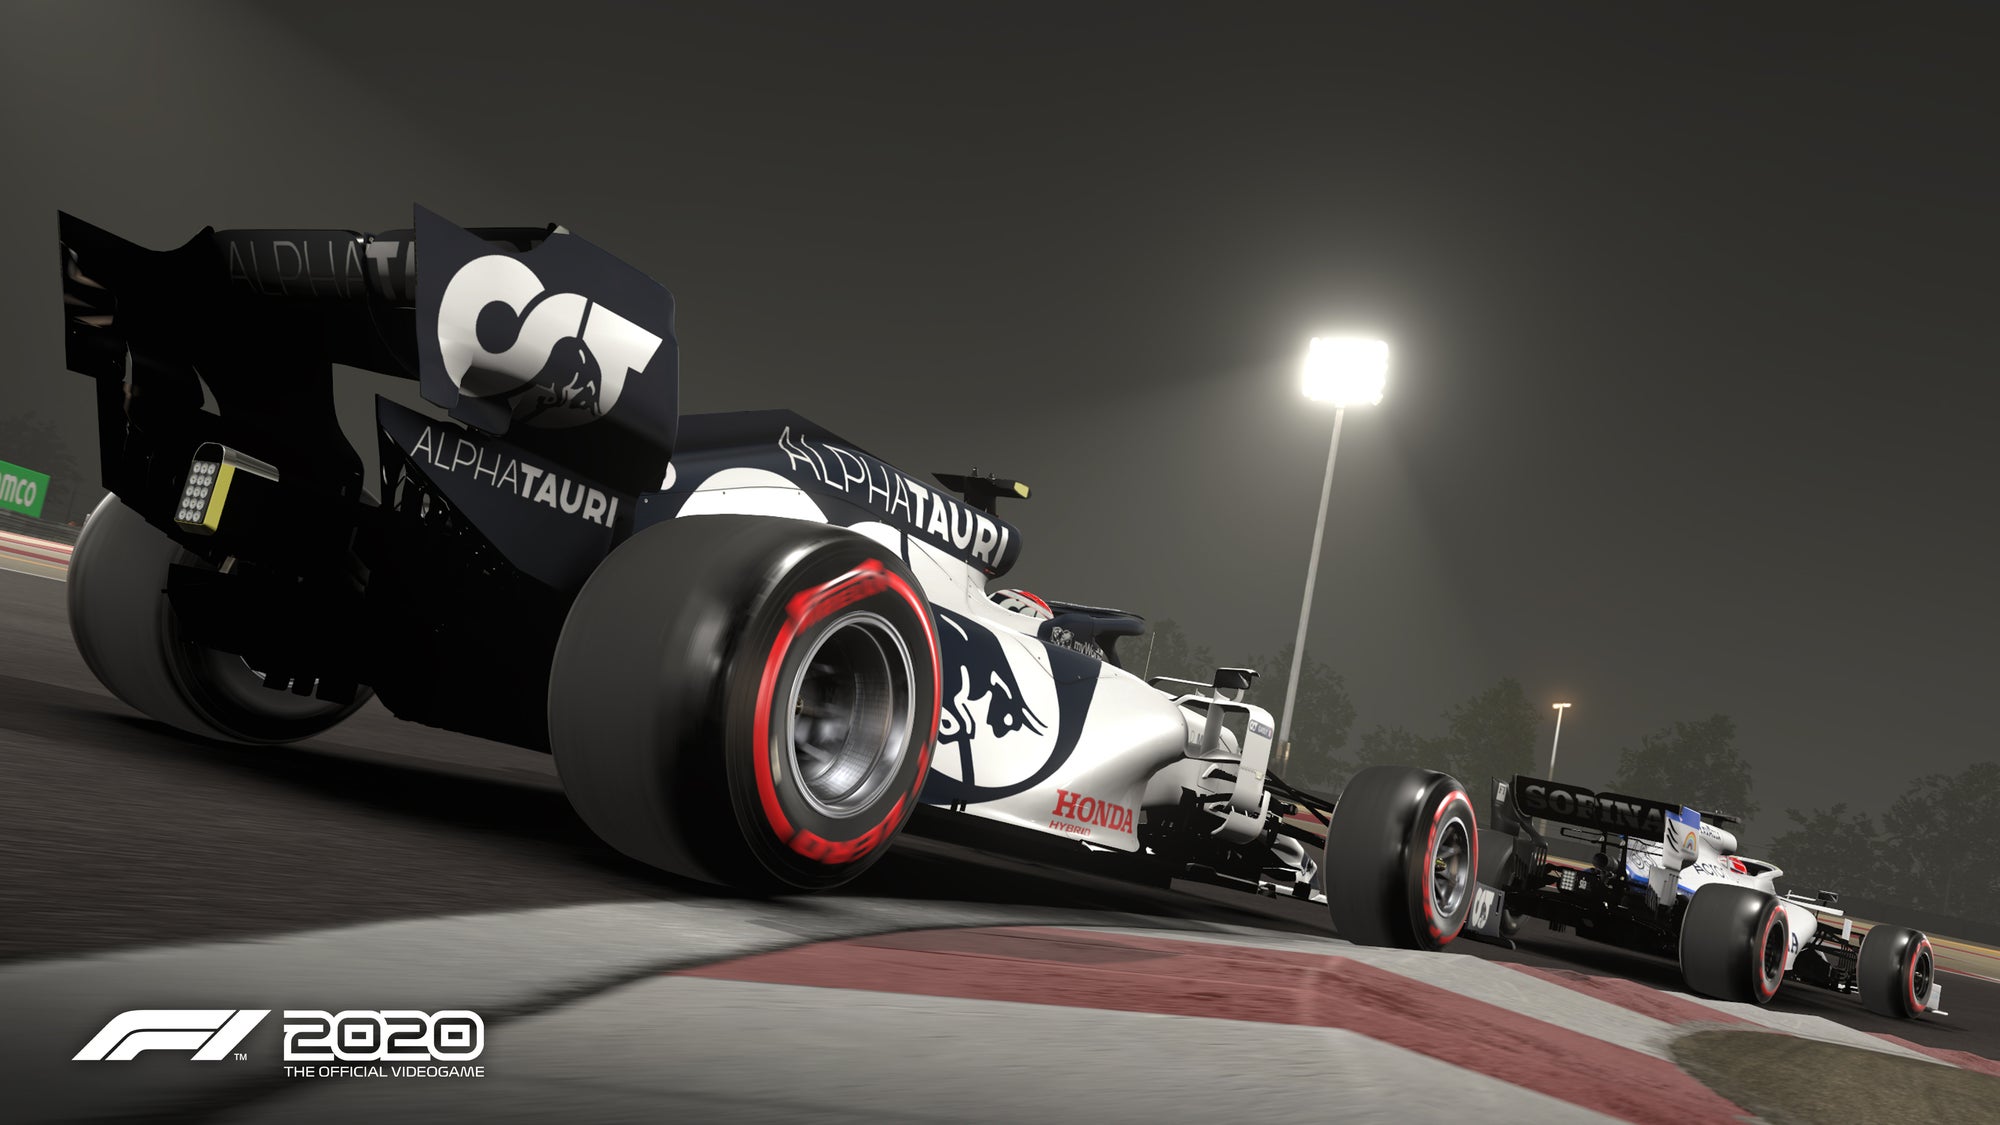 More information about "F1 2020 Codemasters: patch ufficiale v1.17 disponibile"